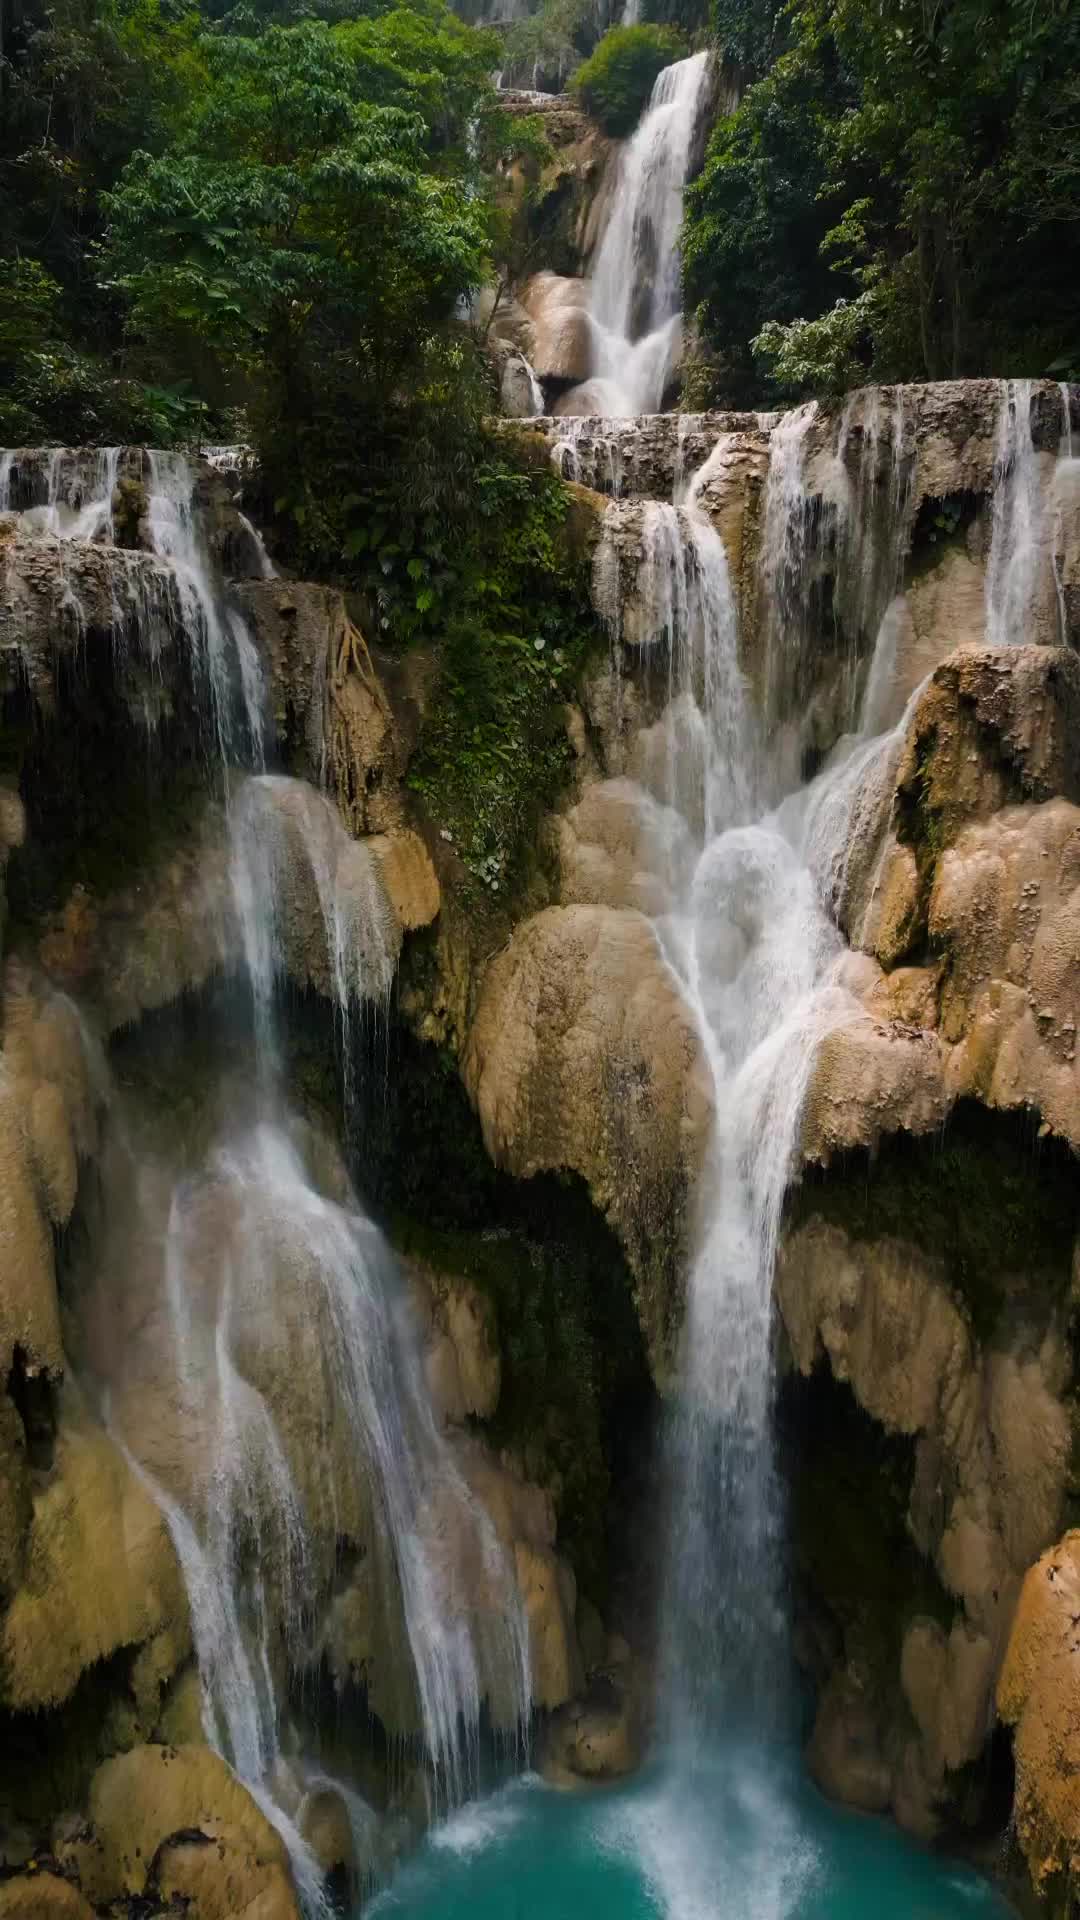 Discover Kuang Si - The Most Beautiful Waterfall in Laos